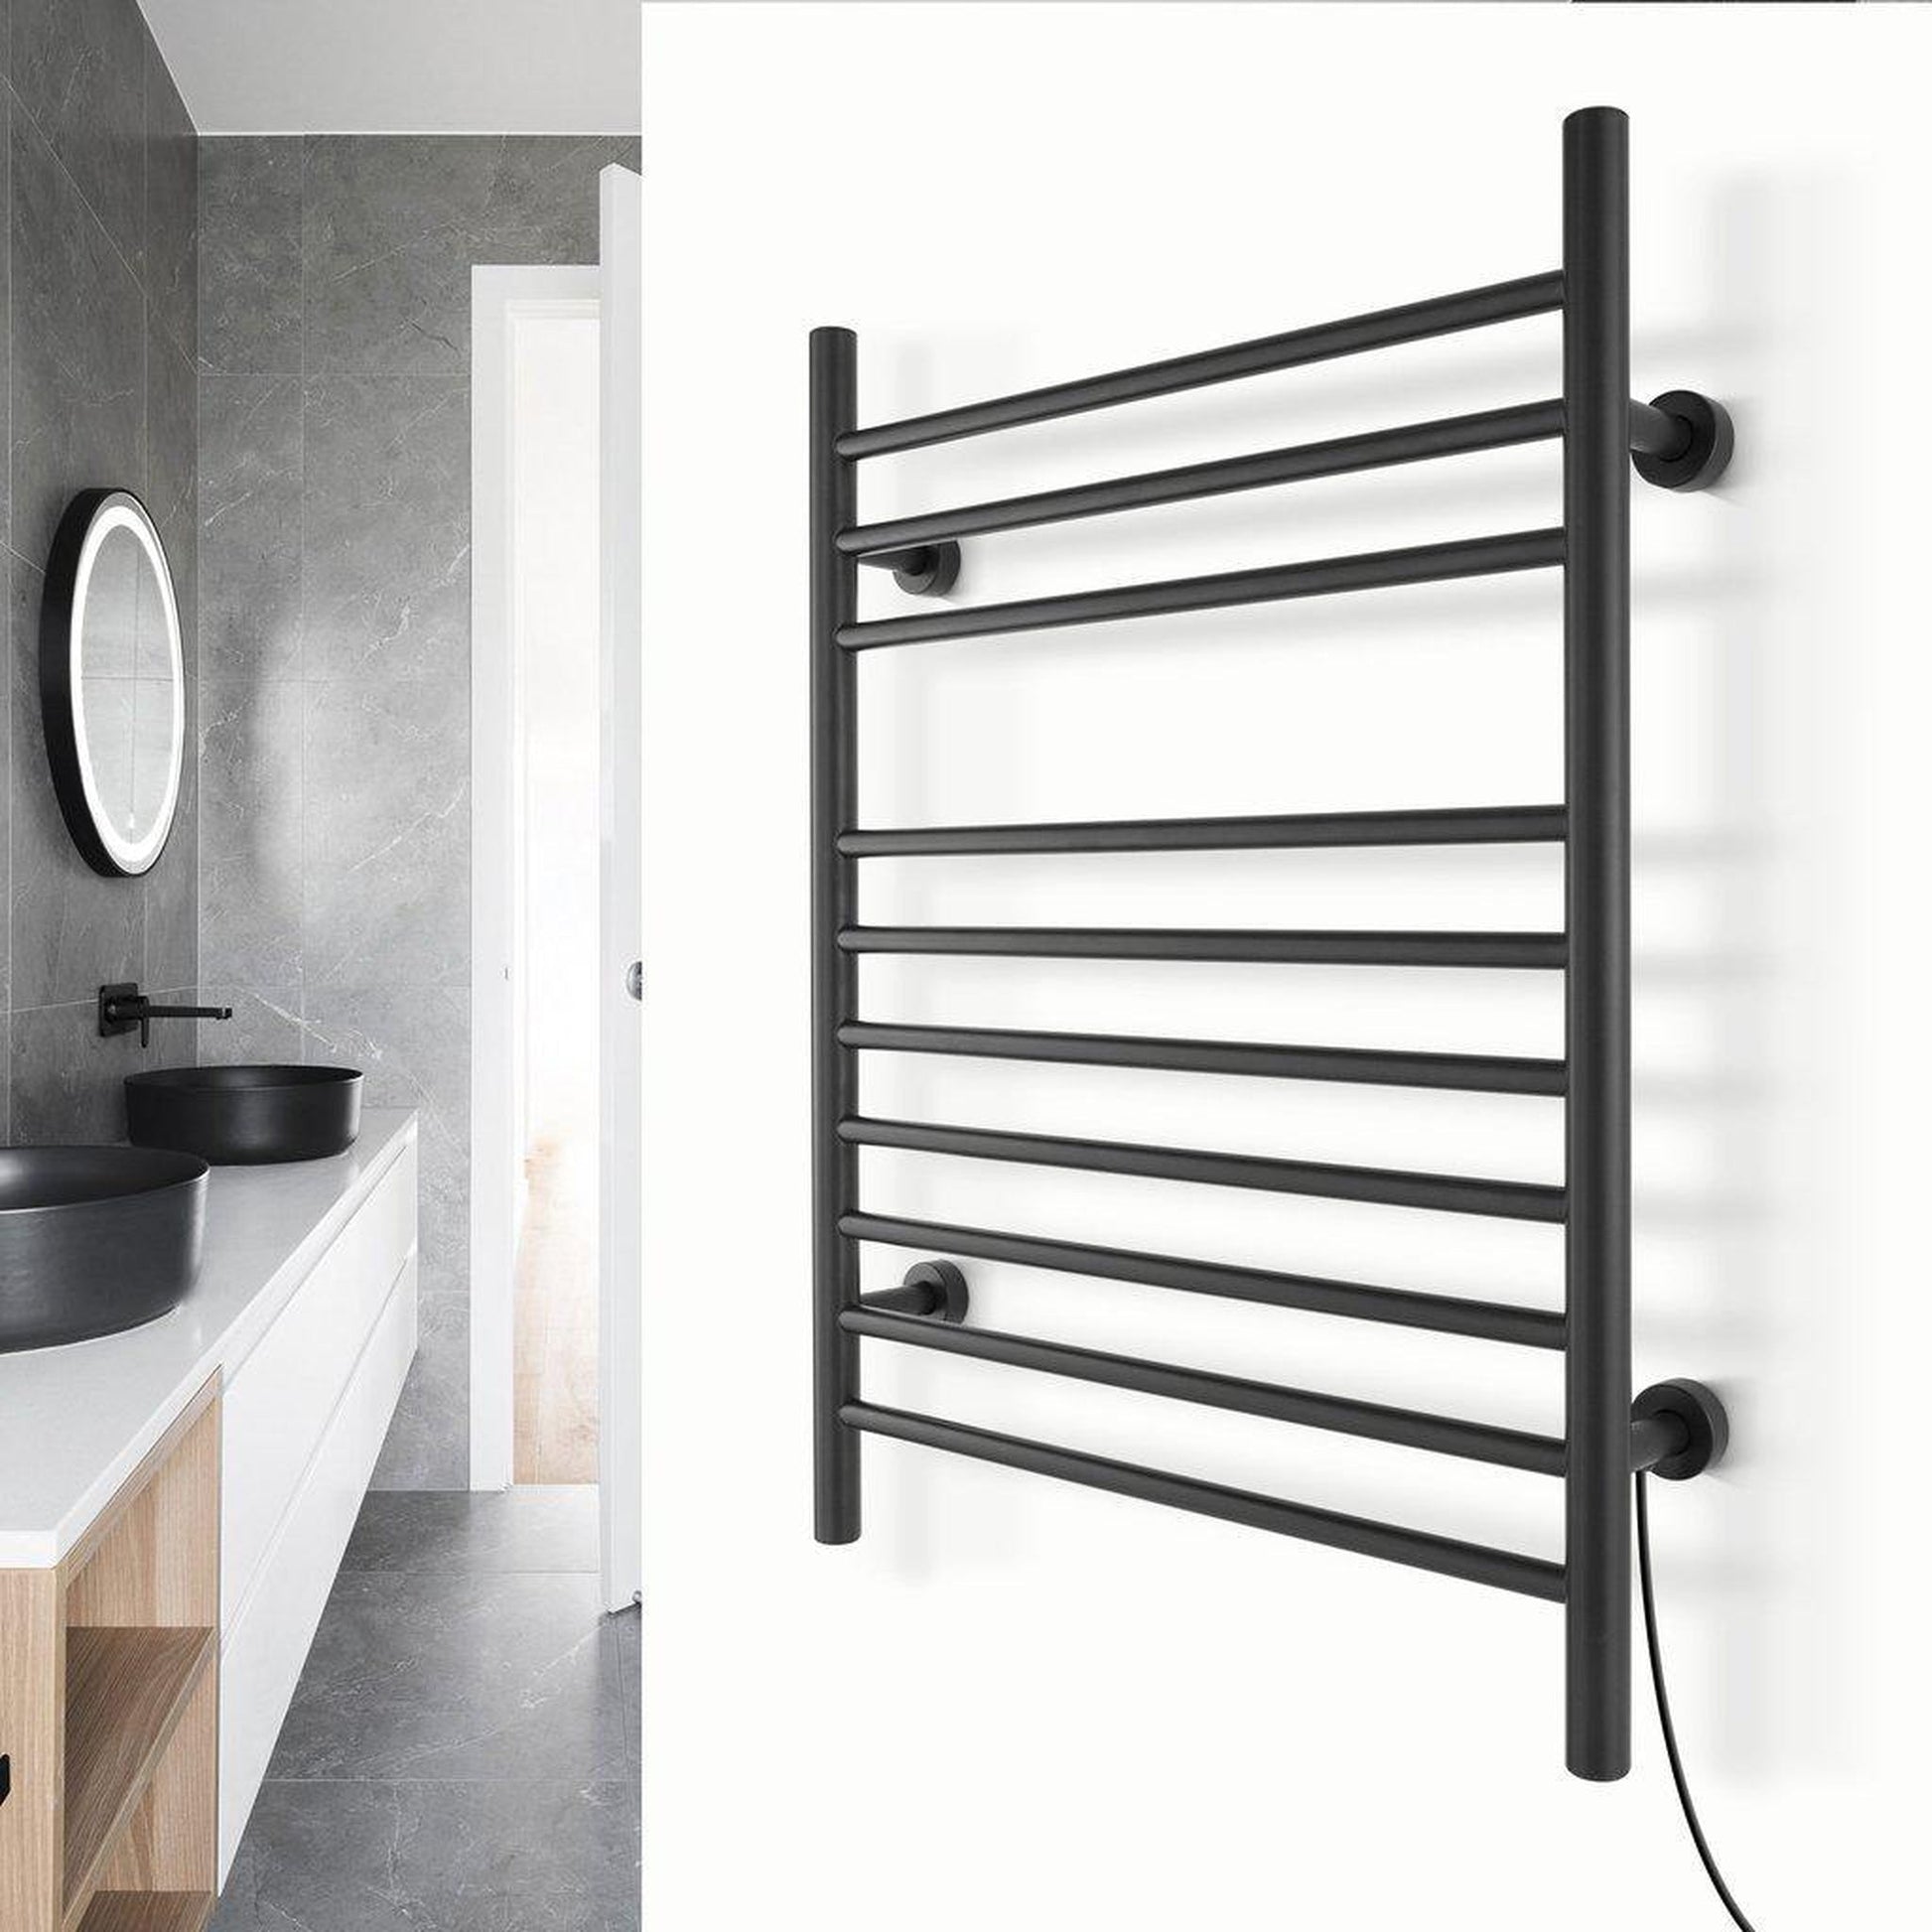 WarmlyYours Infinity 24" x 32" Matte Black Stainless Steel Wall-Mounted 10-Bar Dual Connection Hardwired or Plug-In Towel Warmer